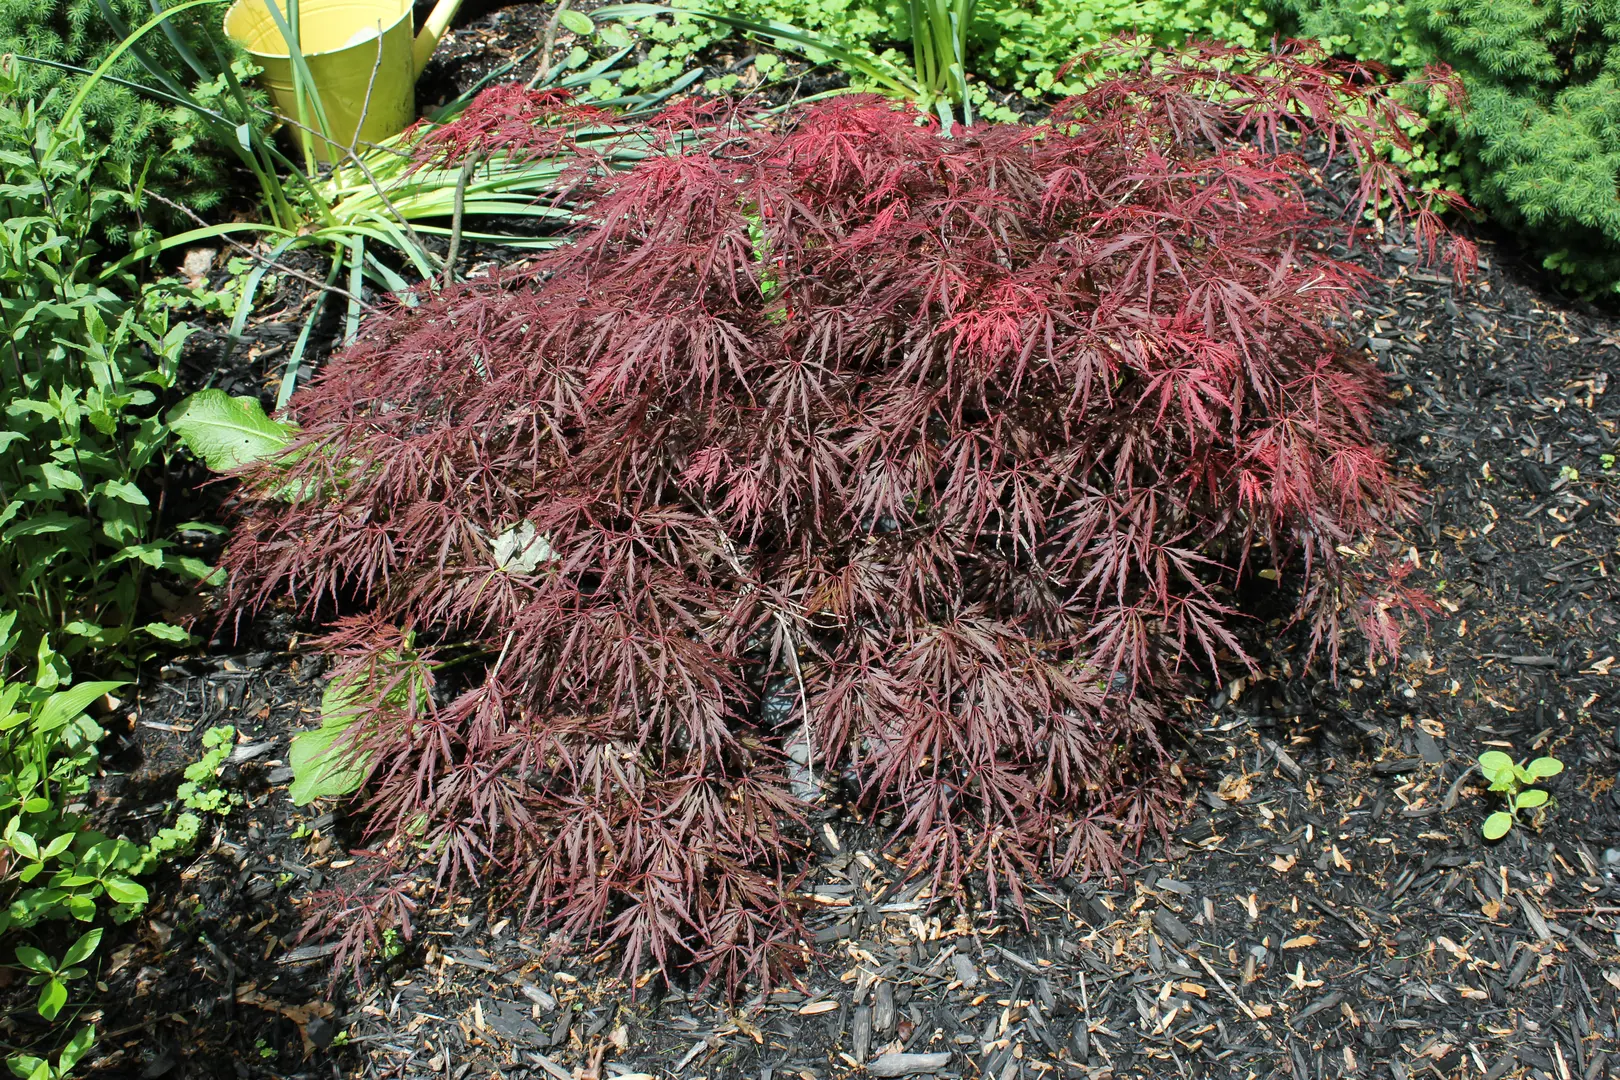 A view of a red foliage